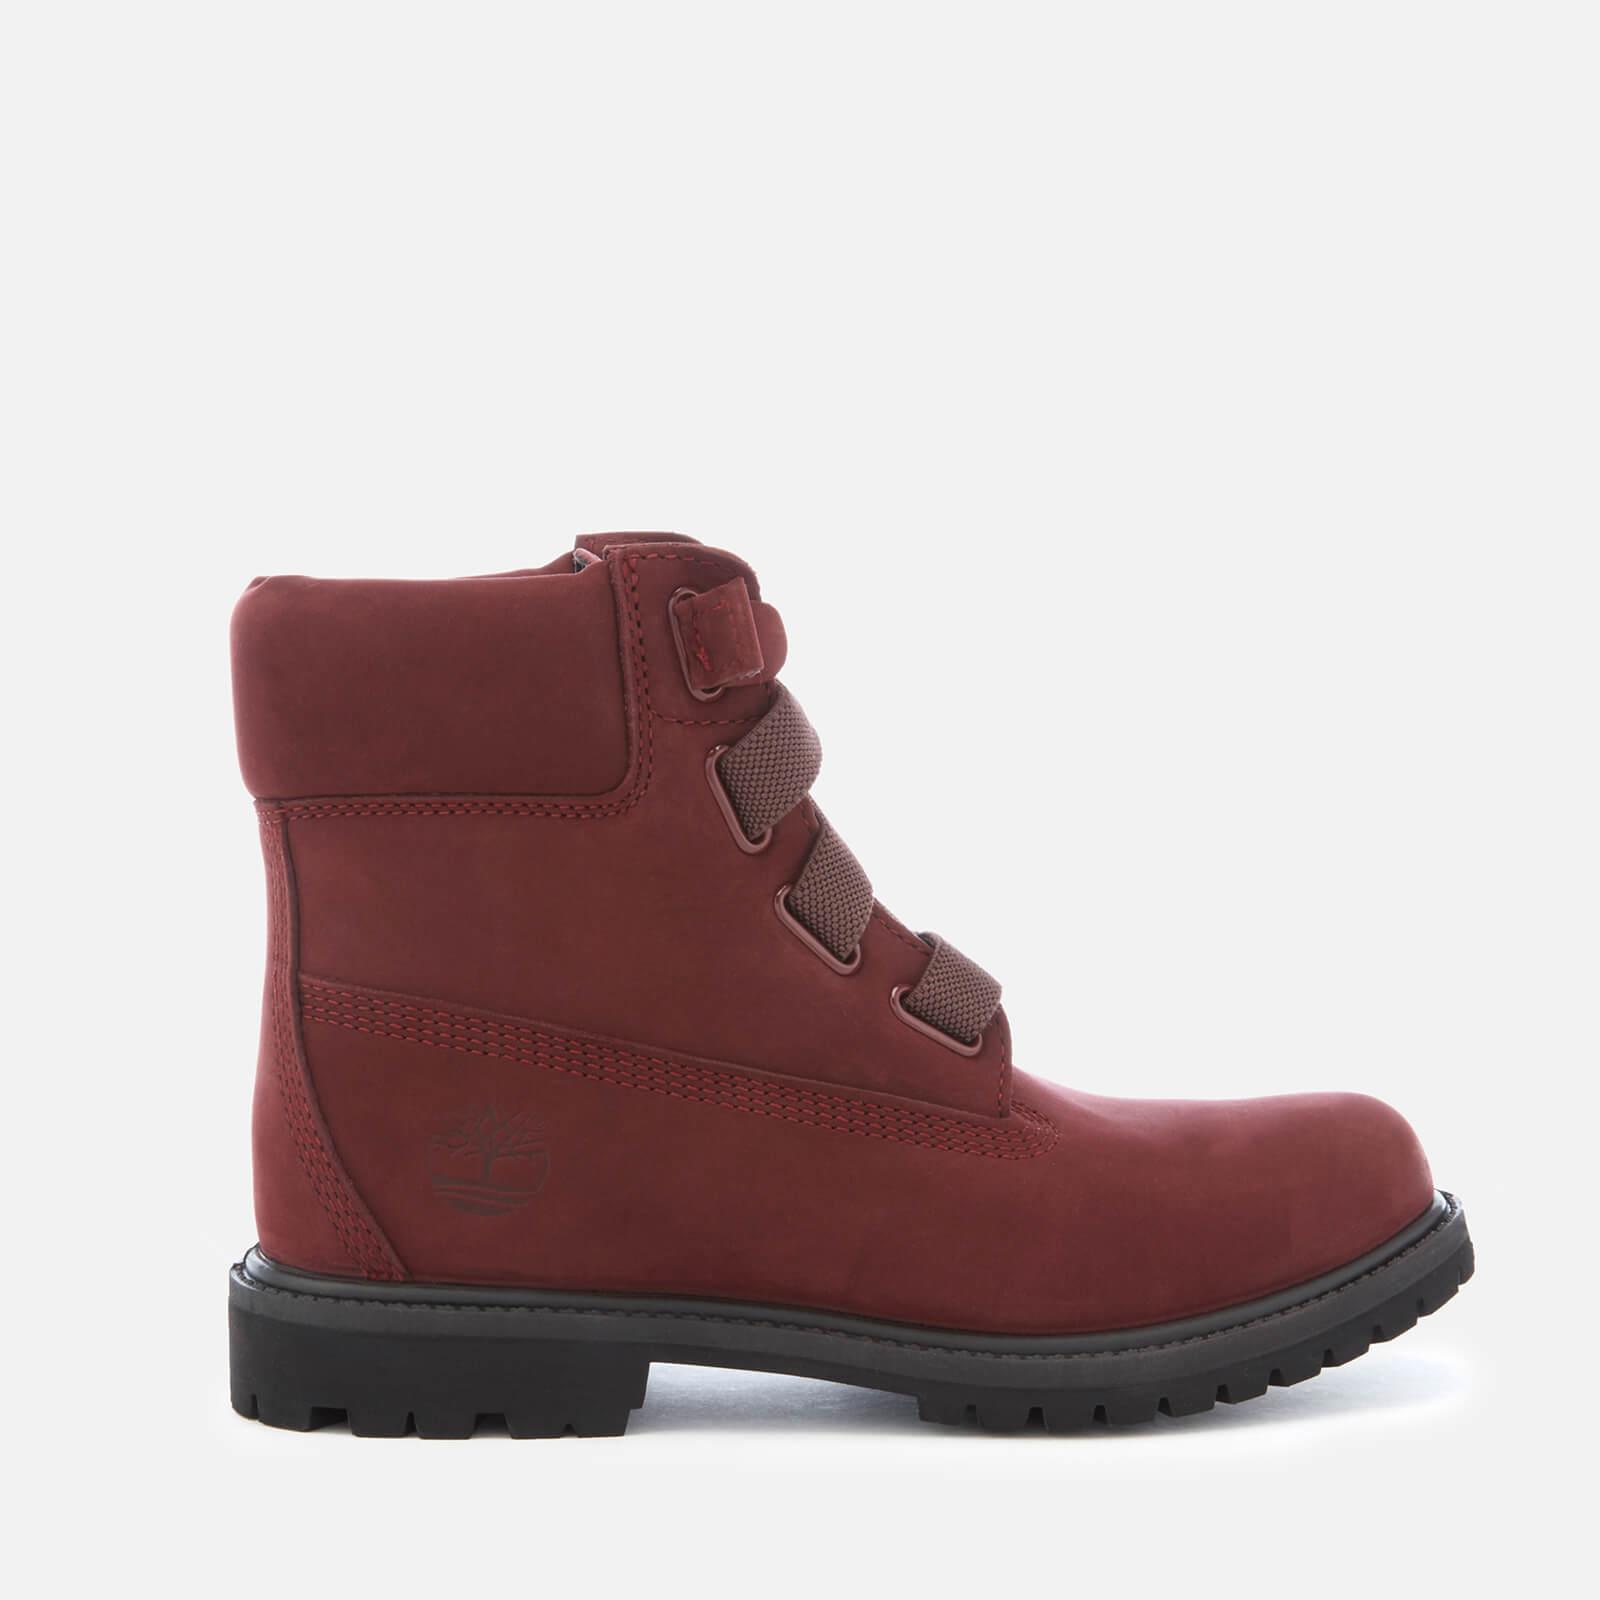 Timberland 6 Inch Premium Waterproof Leather Convenience Boots - Lyst